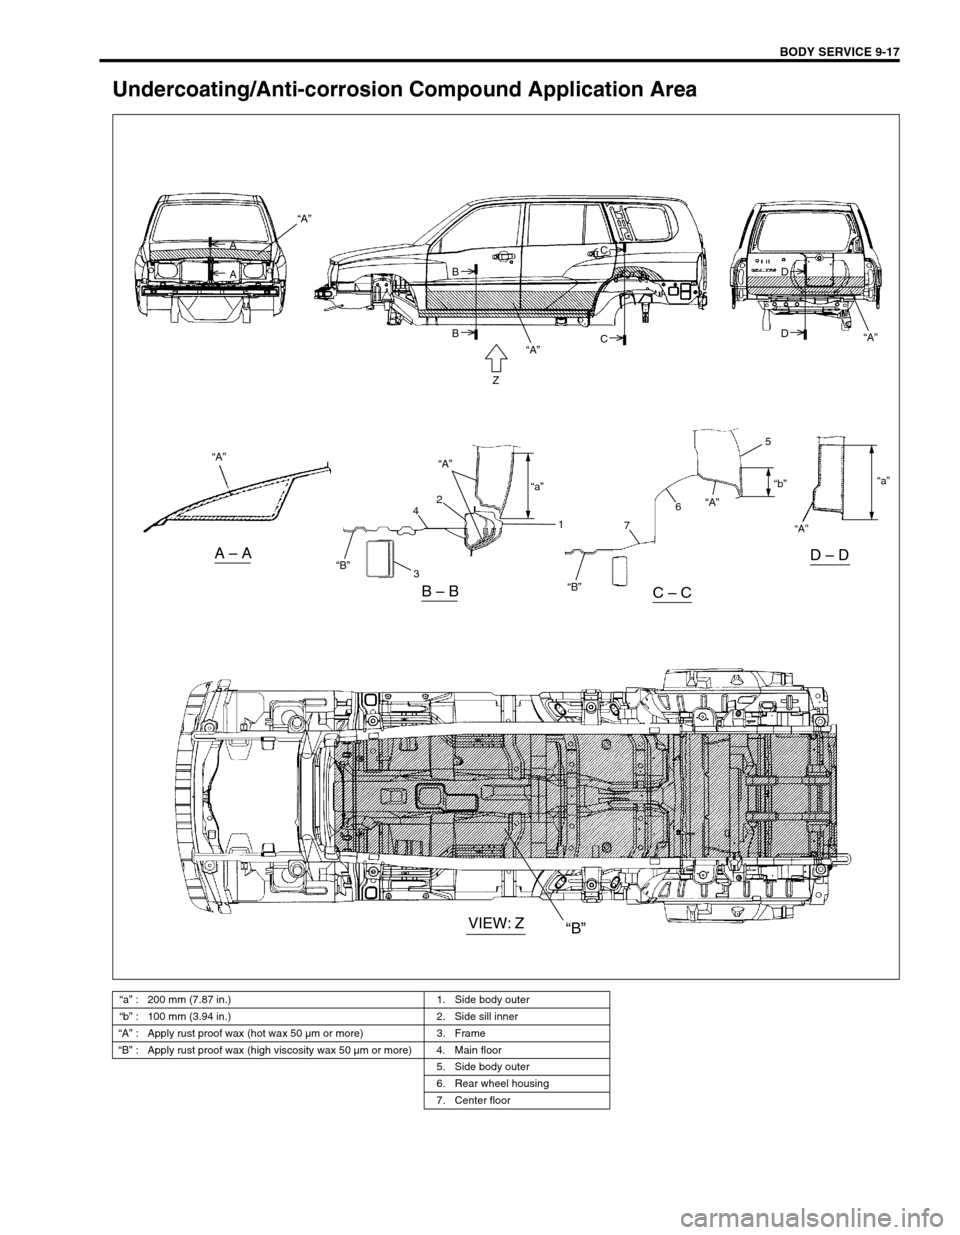 SUZUKI GRAND VITARA 2001 2.G Owners Manual BODY SERVICE 9-17
Undercoating/Anti-corrosion Compound Application Area
“a” : 200 mm (7.87 in.) 1. Side body outer
“b” : 100 mm (3.94 in.) 2. Side sill inner
“A” : Apply rust proof wax (ho